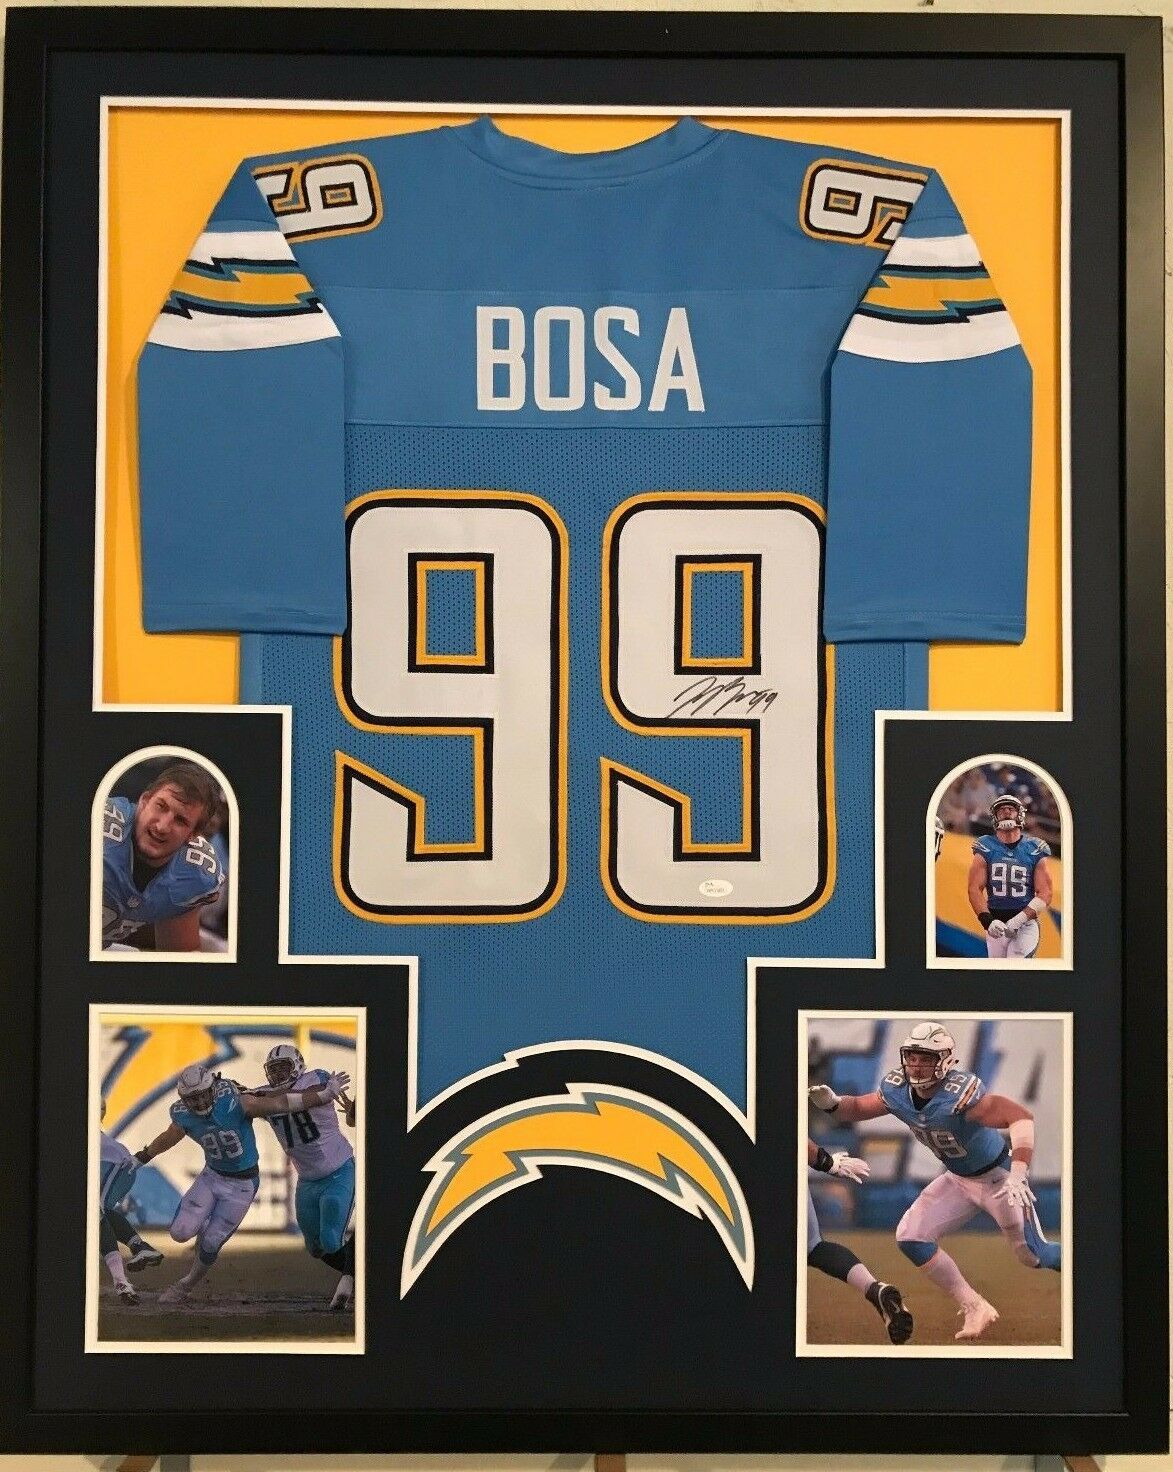 joey bosa san diego chargers jersey